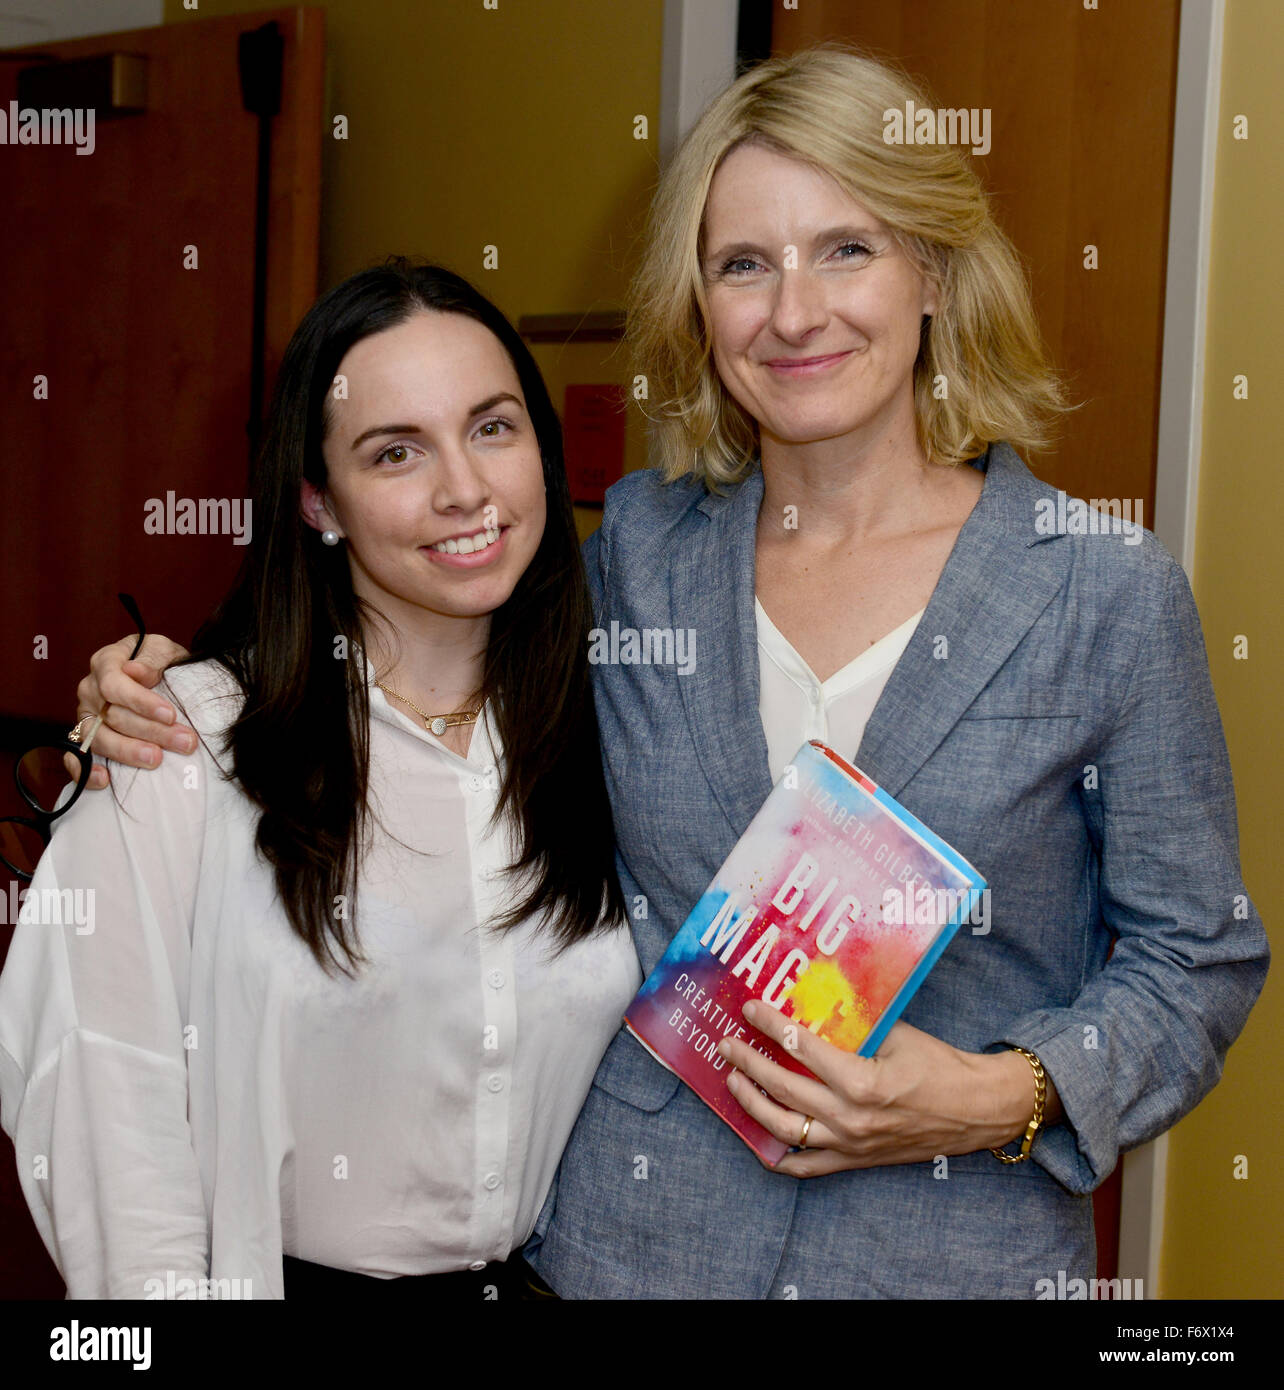 'Eat Pray Love' author Elizabeth Gilbert speaks and reads from her new book 'Big Magic' presented by Books and Books at the James L Knight Concert Hall at Adrienne Arsht Center  Featuring: Sharon Steel-Cardenal, Elizabeth Gilbert Where: Miami, Florida, Un Stock Photo